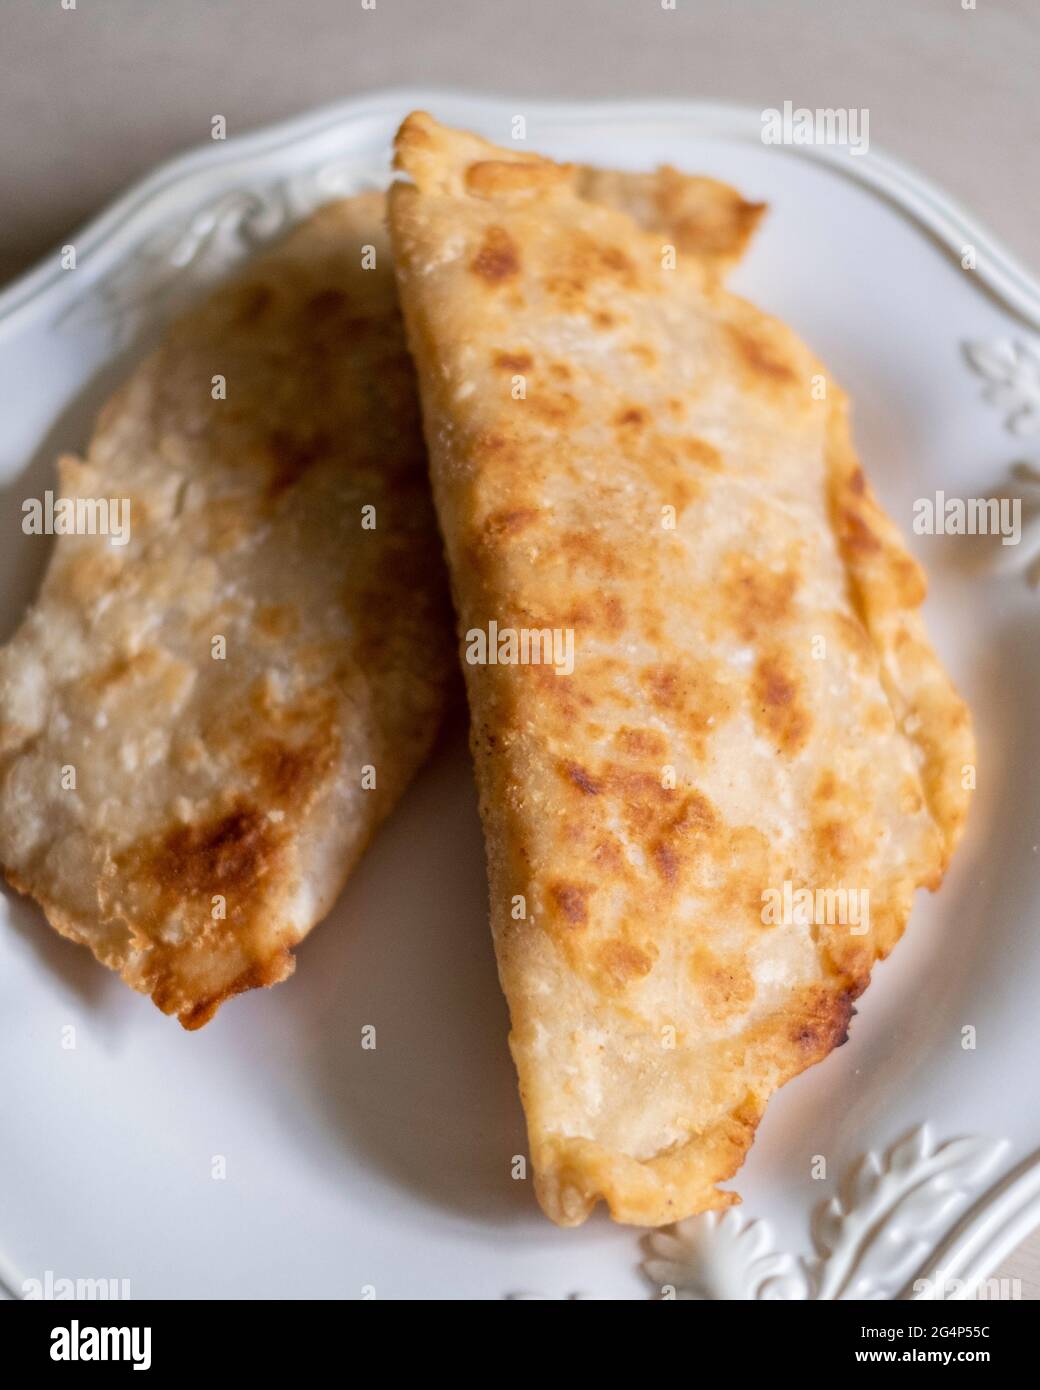 Homemade fried apple pies made from dried apples with flaky pie crust on a white plate. Stock Photo